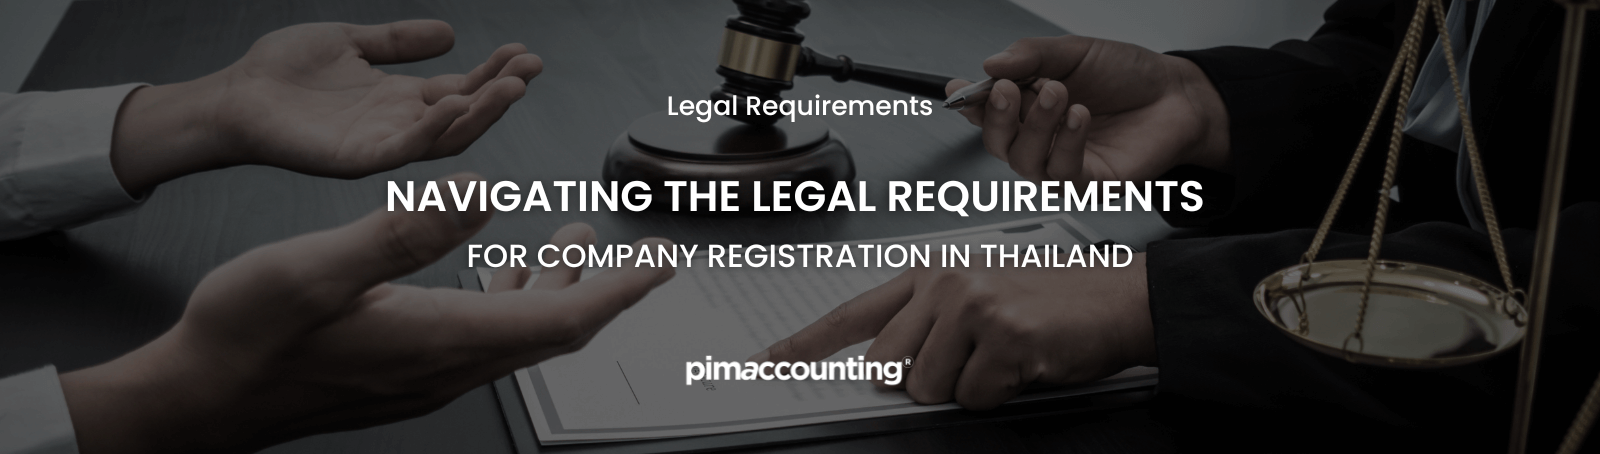 Navigating the Legal Requirements for Company Registration in Thailand